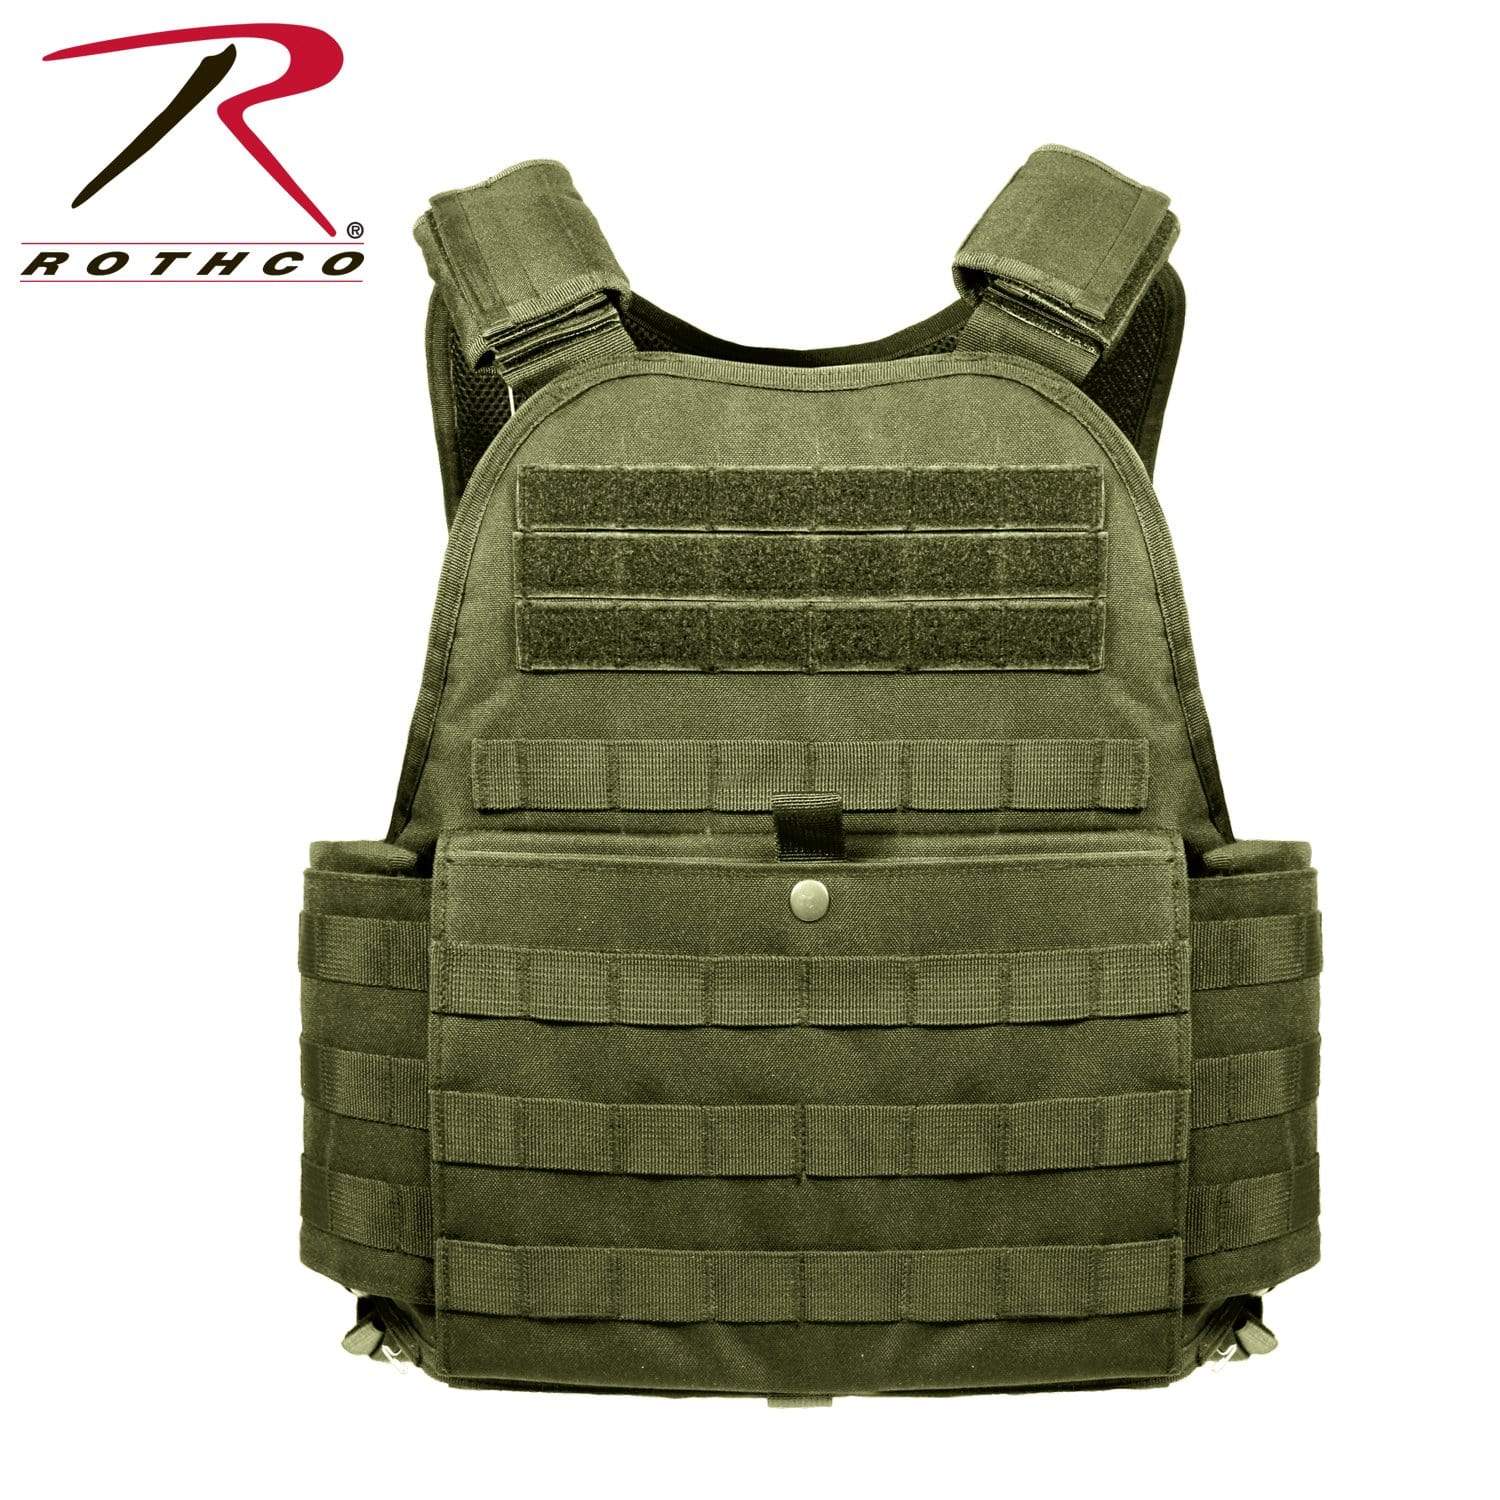 Rothco MOLLE Plate Carrier Vest - Olive Drab - Eminent Paintball And Airsoft